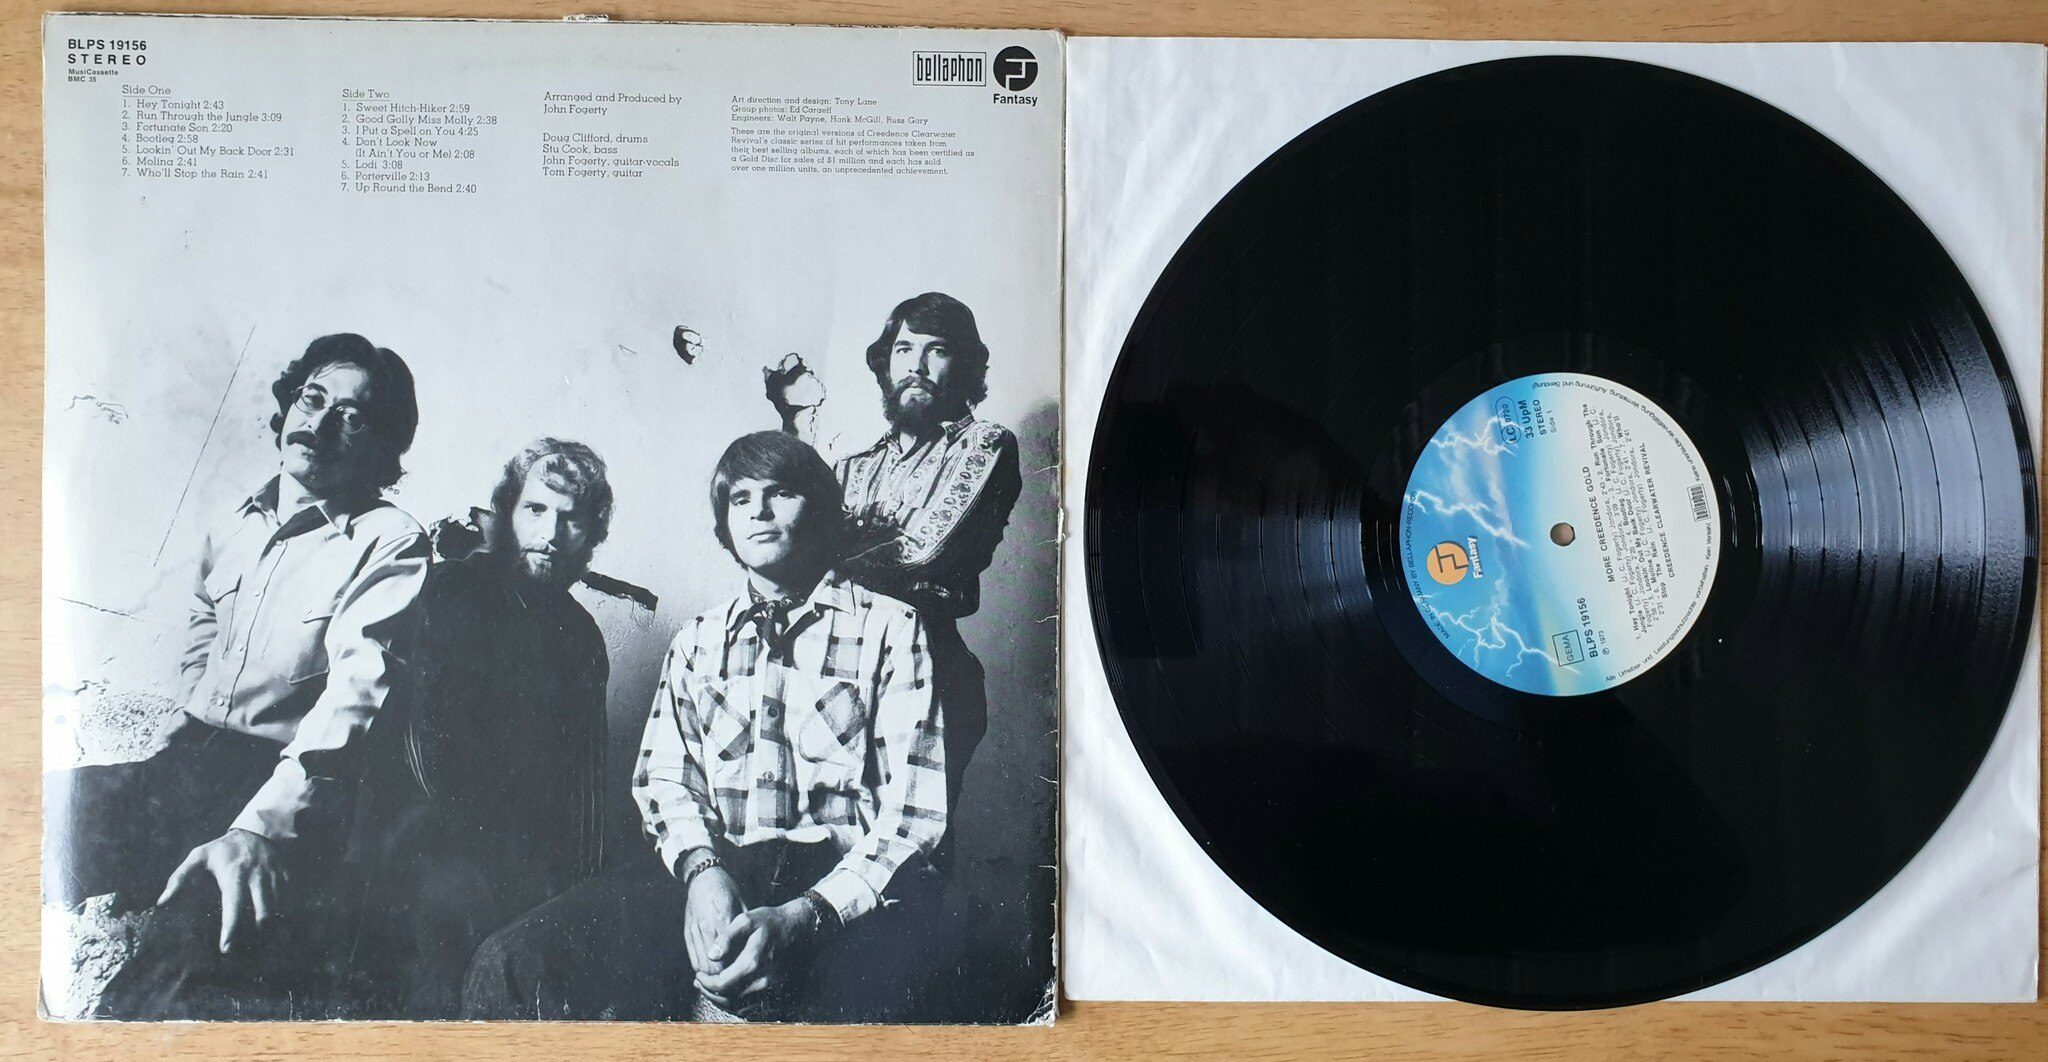 Creedence Clearwater Revival, More Creedence gold. Vinyl LP